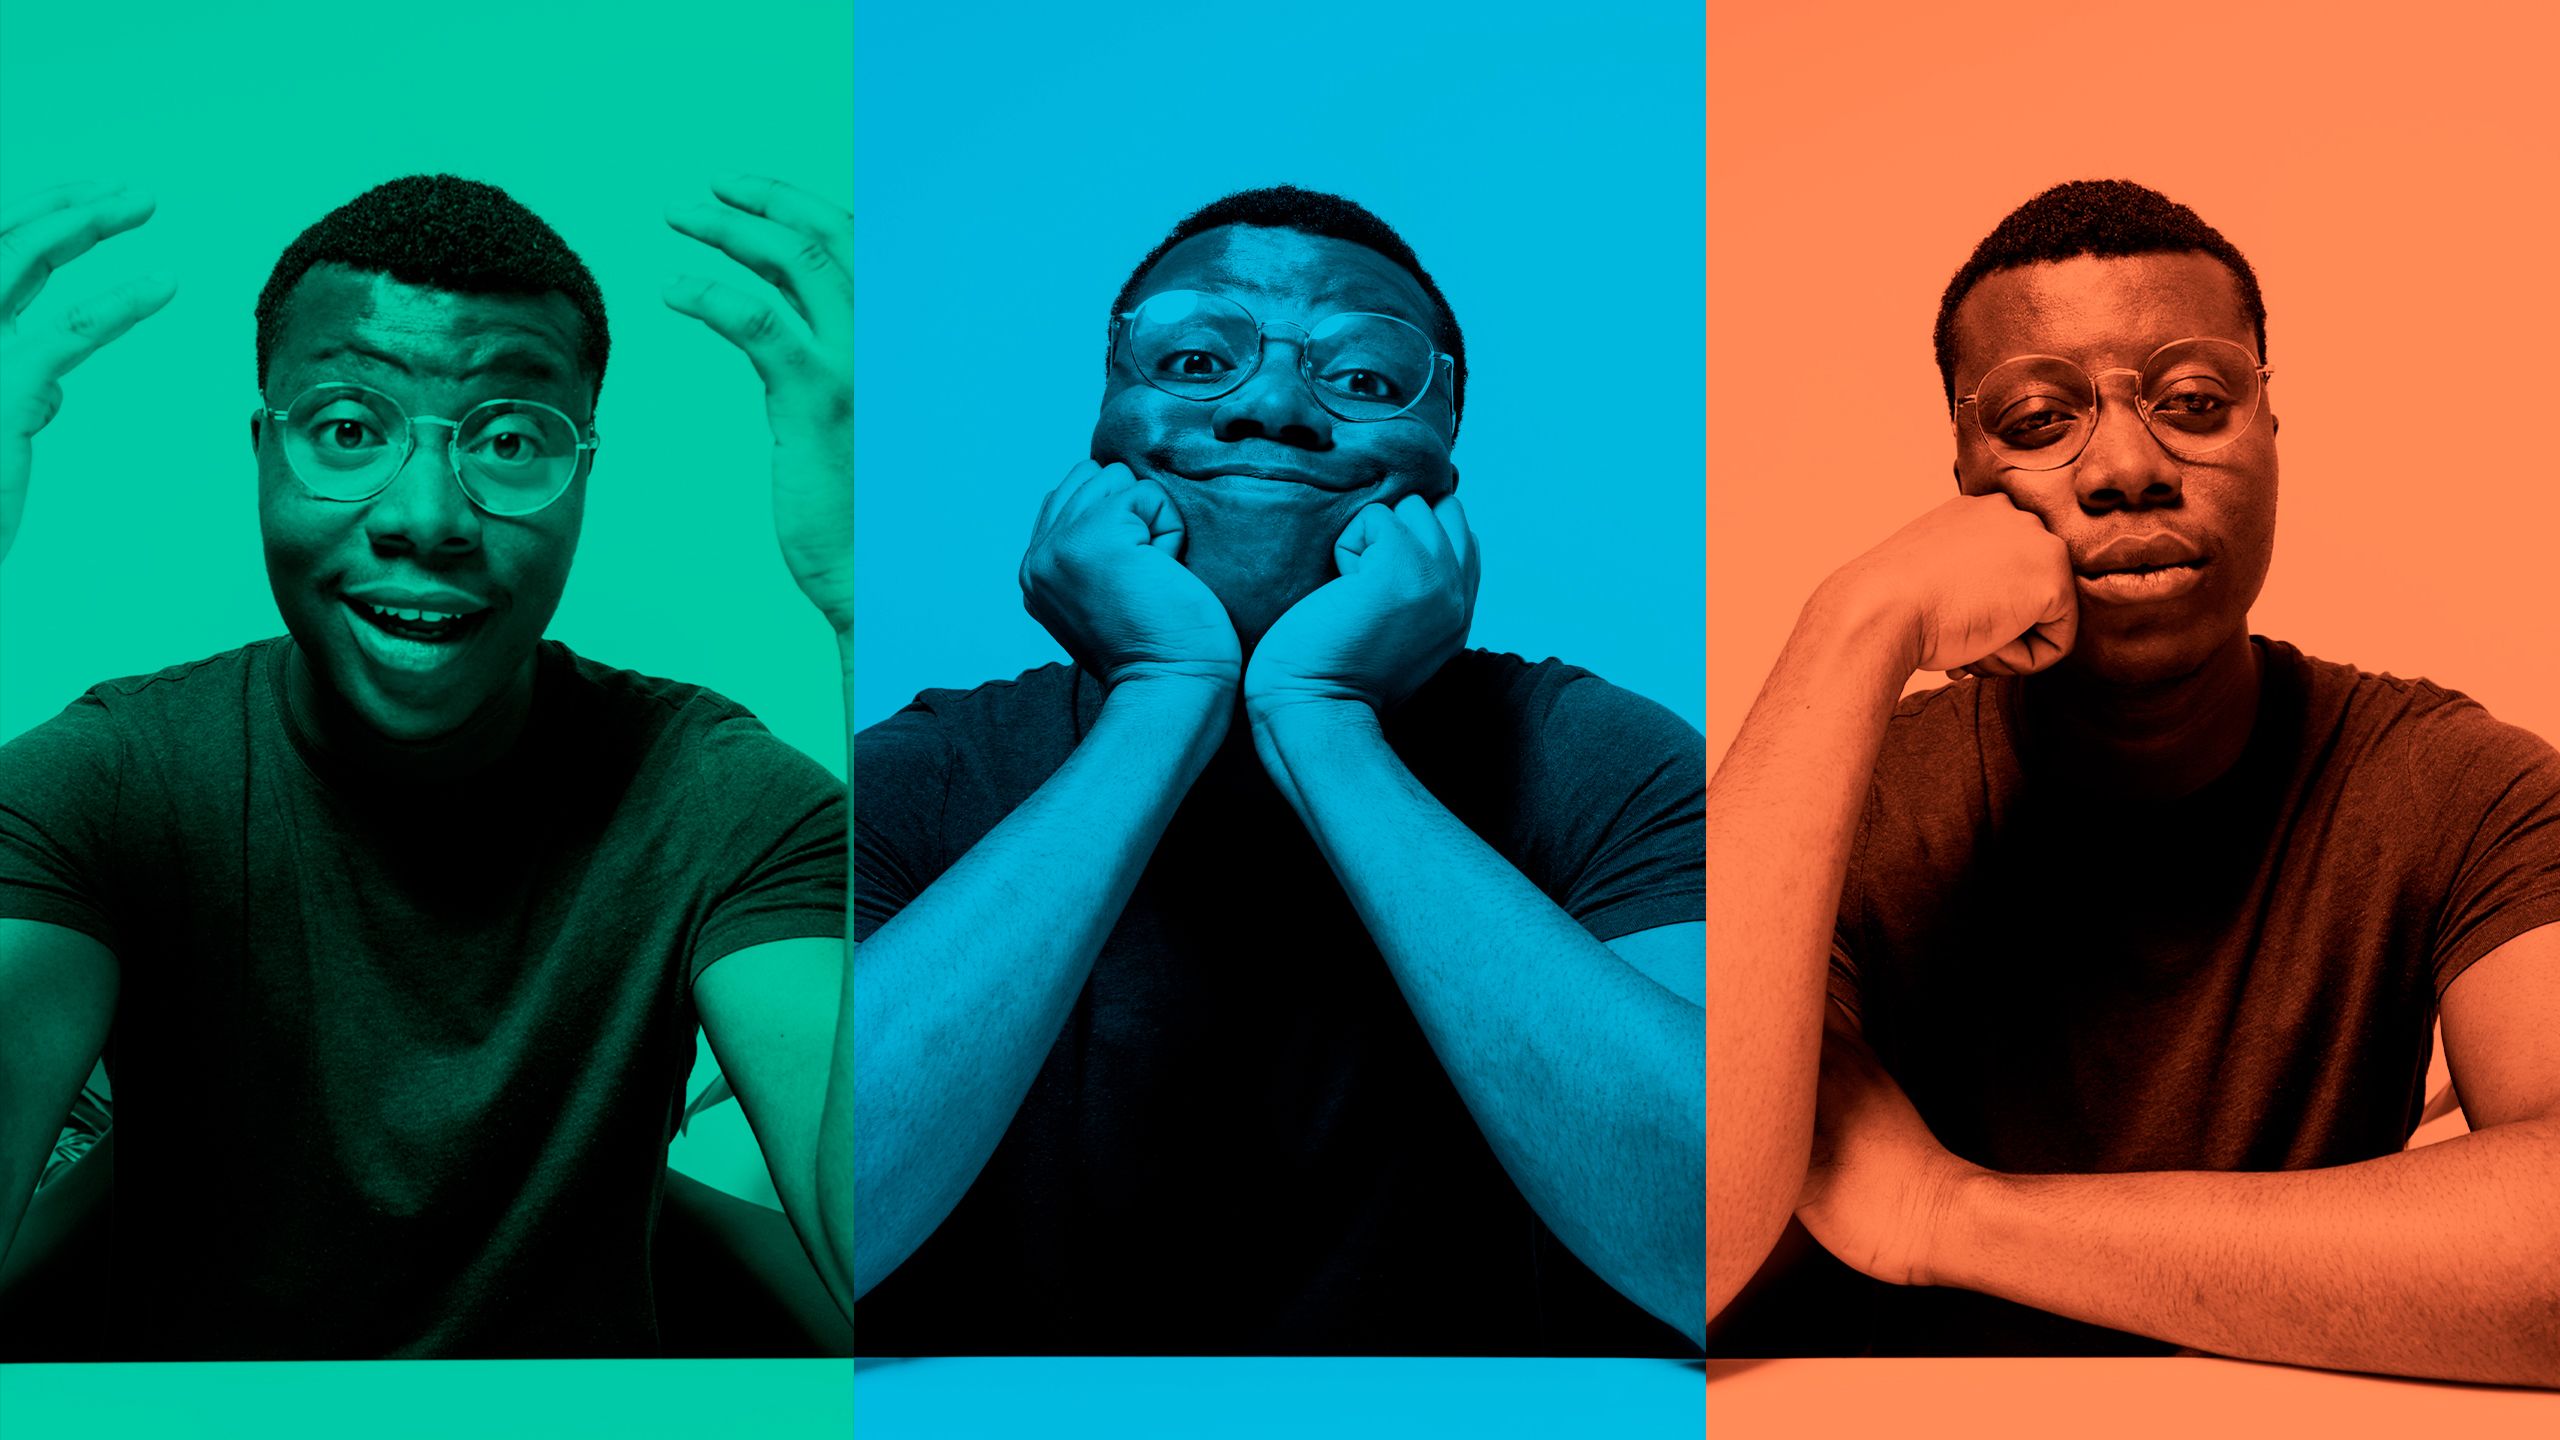 Three frames with a green, blue and orange filter showing three different facial expressions of a man listening and reacting during an online meeting.